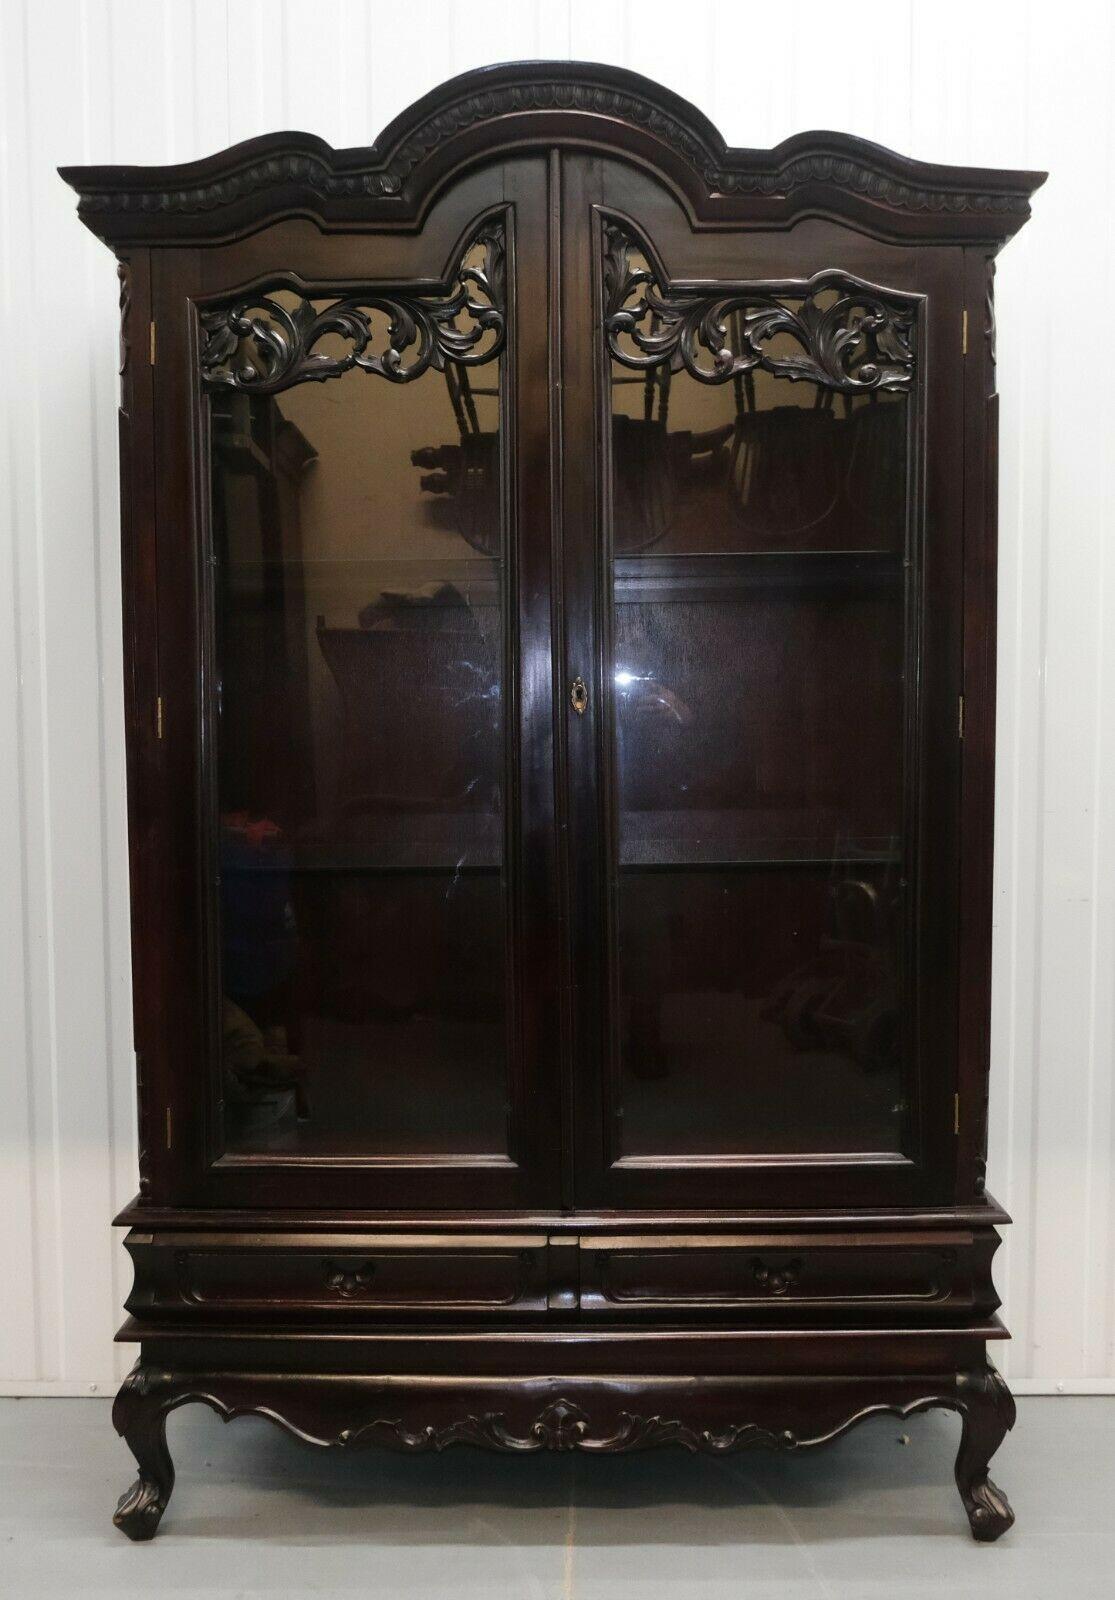 We are delighted to offer for sale this stylish Chinese hardwood glazed cabinet standing on cabriole legs.

The cabinet is charming and decorative, with a pair of drawers, glazed side panels and two glass shelves for display and storage. 

The